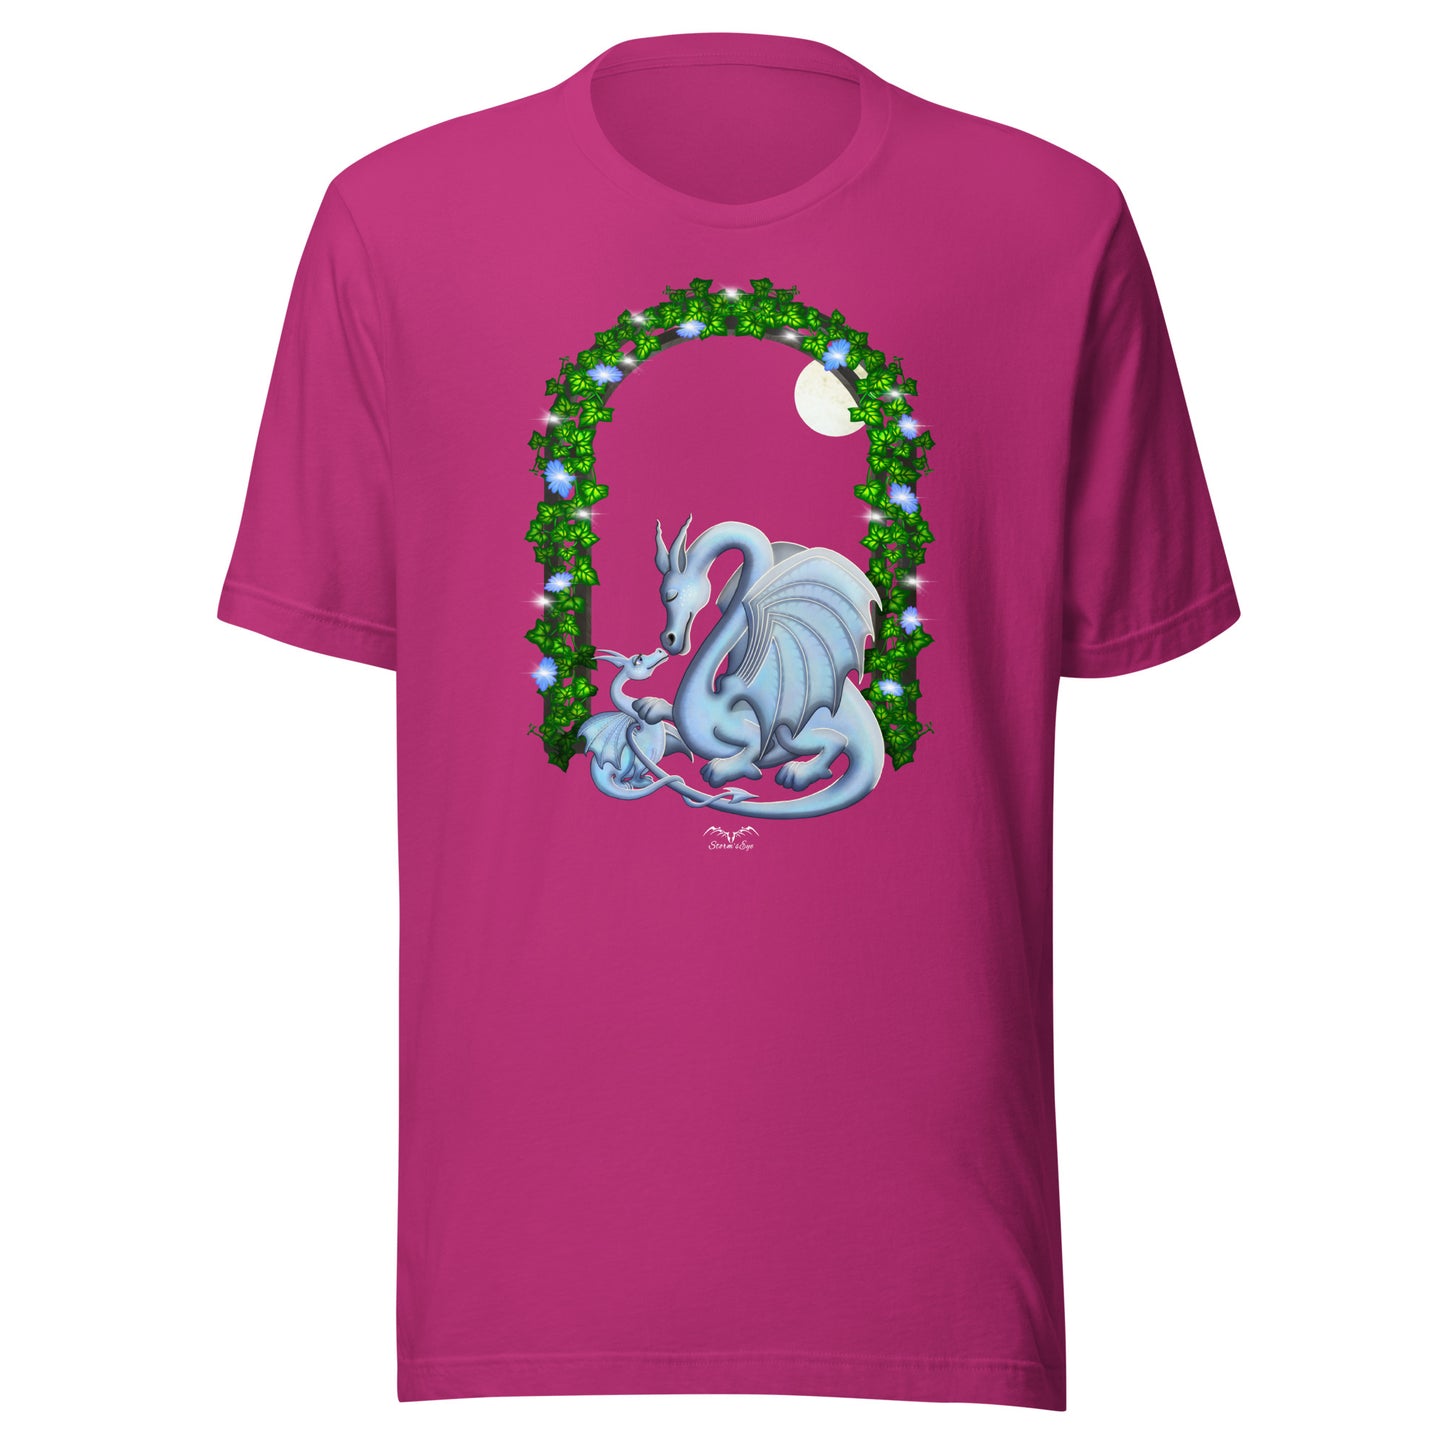 Mum and baby dragon T-shirt, bright pink, by Stormseye Design